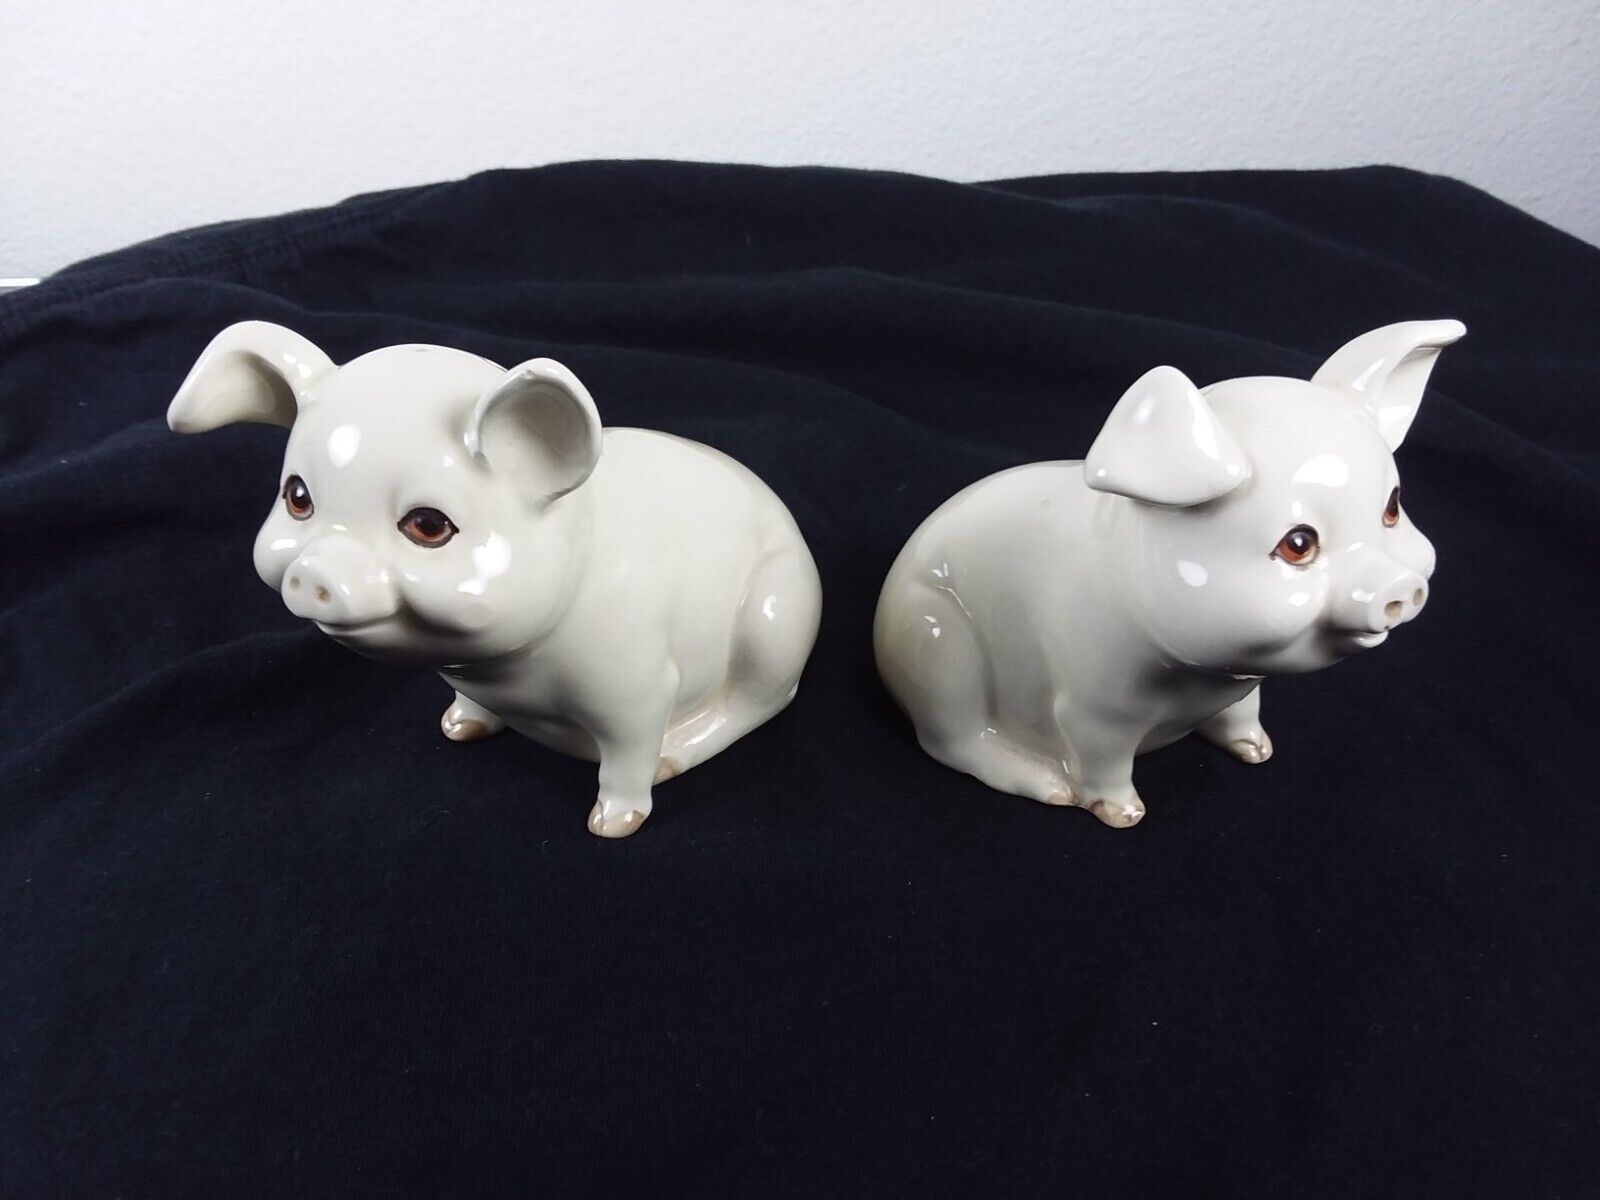 Cute Funny Vintage Pigs  Salt and Pepper Shakers Quon Japan